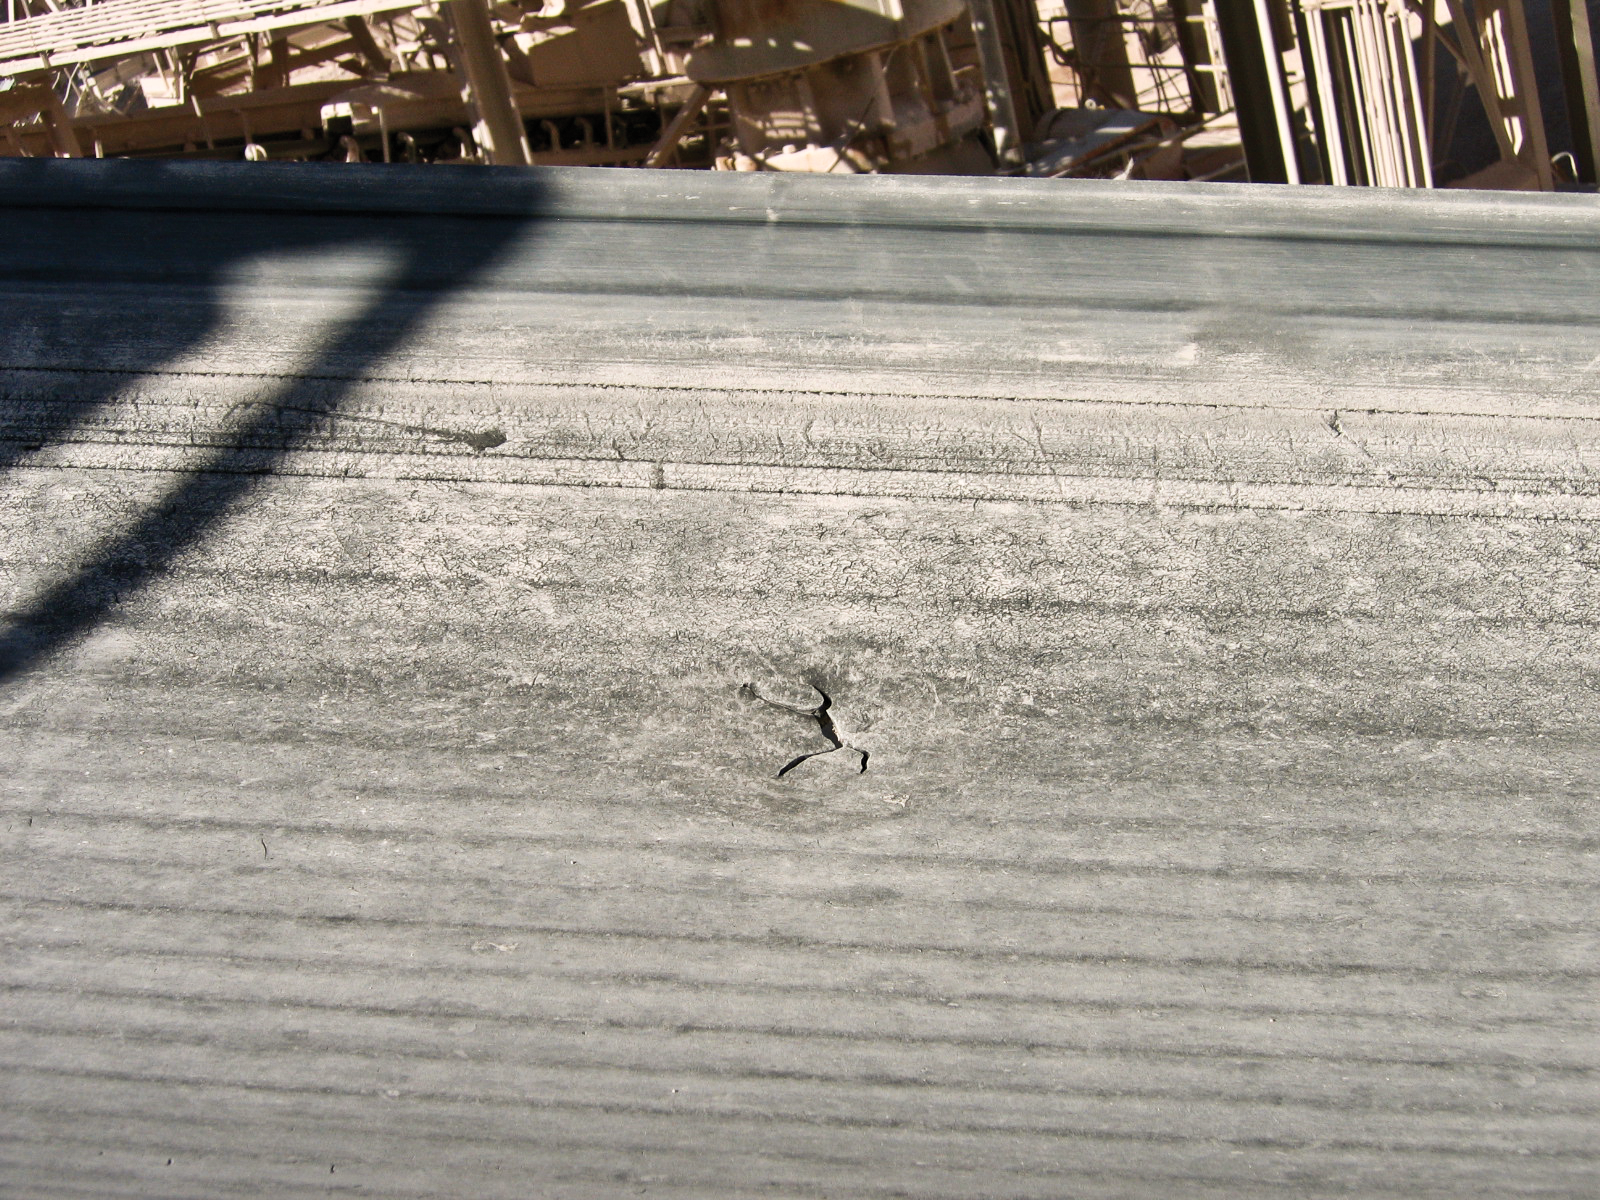 A cracked hole appears on the surface of a conveyor belt.